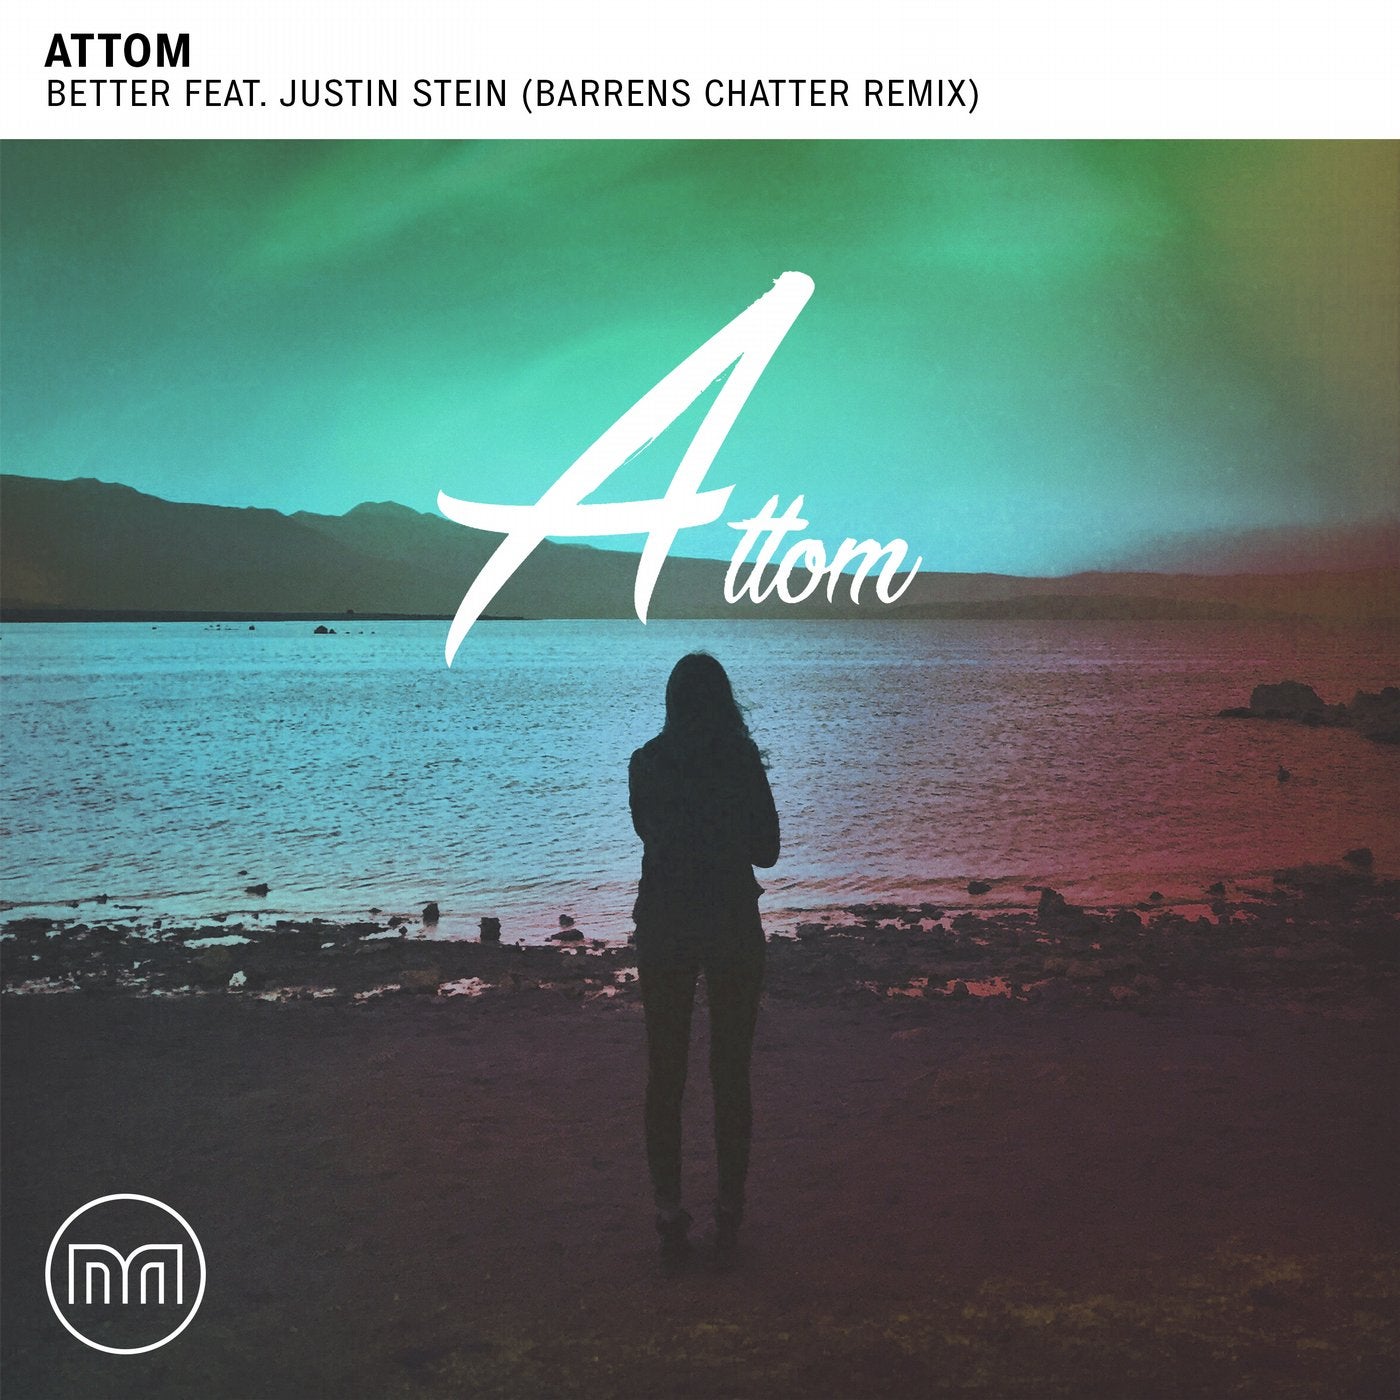 Better feat. Justin Stein. Better Justin Stein. Attom. Attom feat. She is Jules feeling Alive.